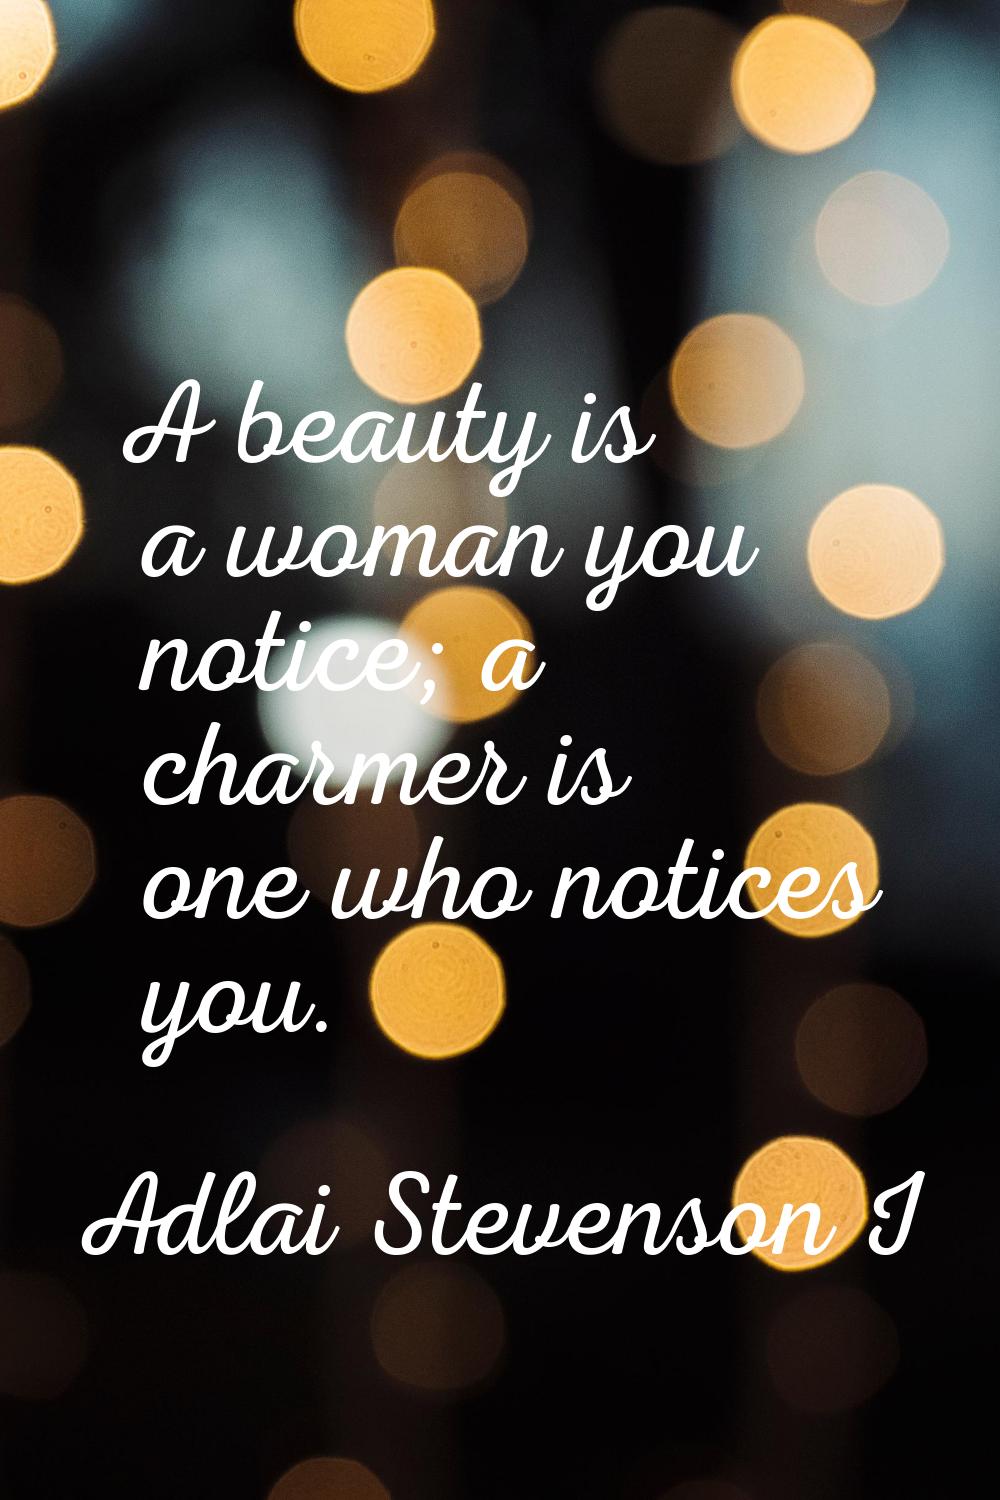 A beauty is a woman you notice; a charmer is one who notices you.